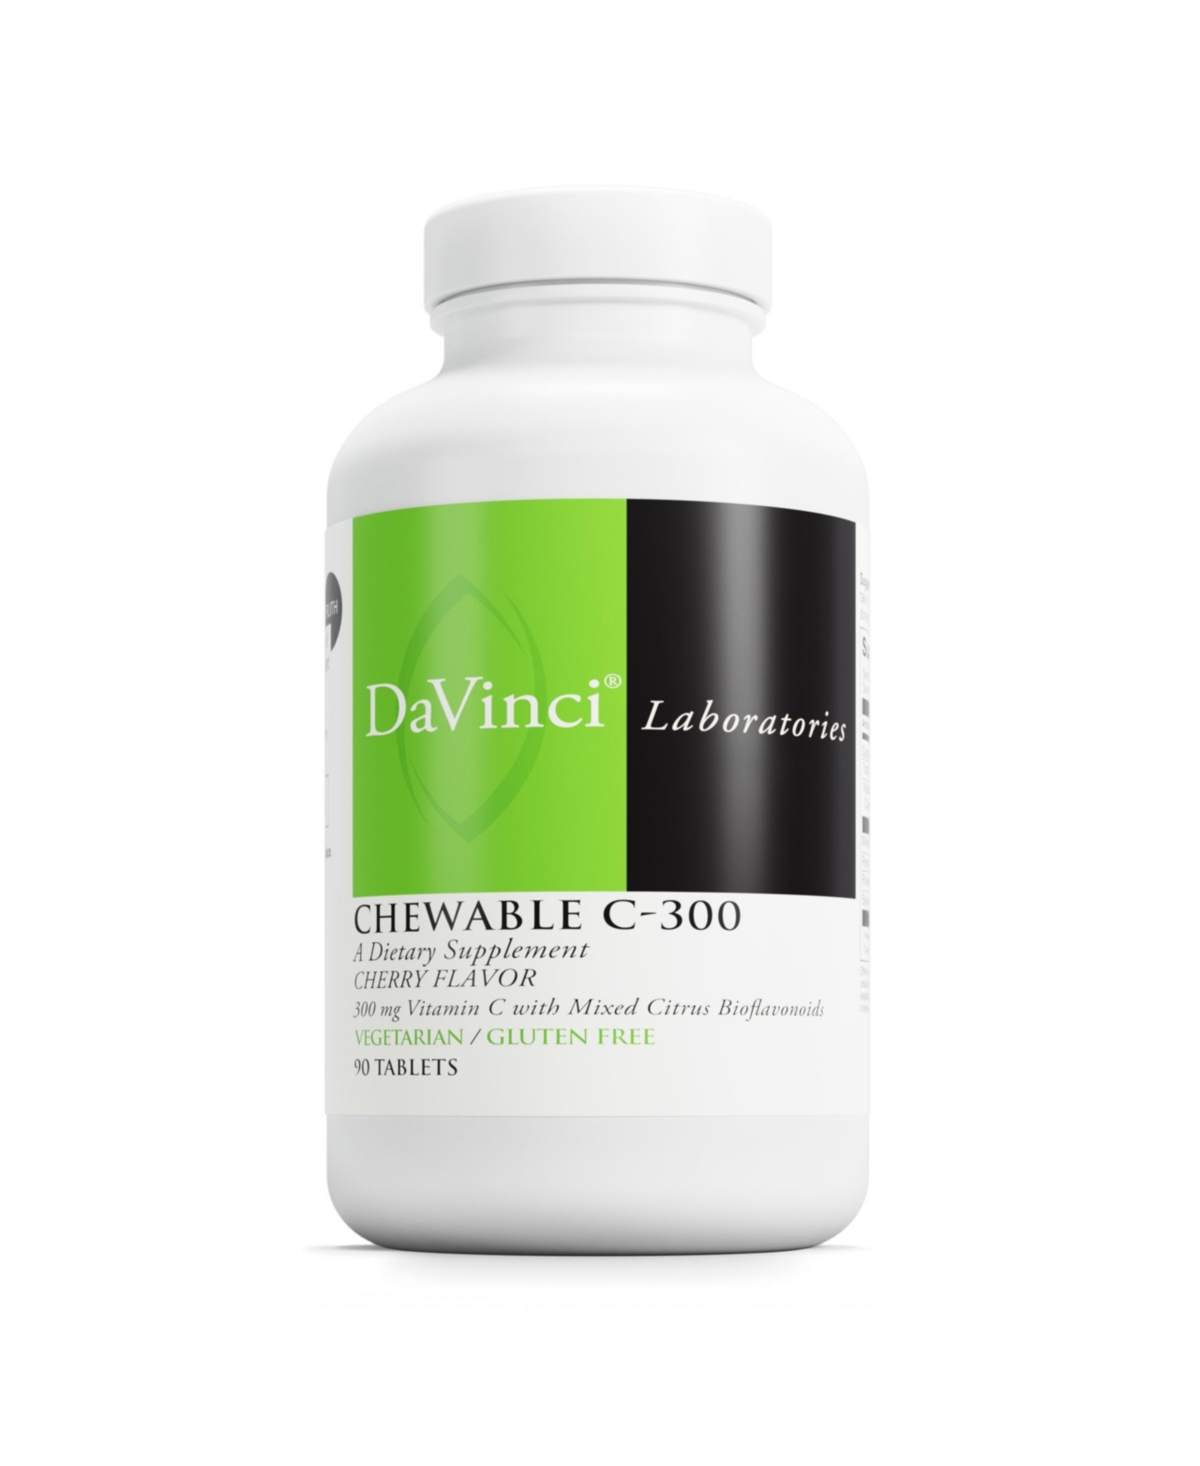 DaVinci Labs Chewable C-300 - Vitamin C Supplement to Support Immune Health, Cholesterol and Collagen Production - With Vitamin C, Pectin and More - G